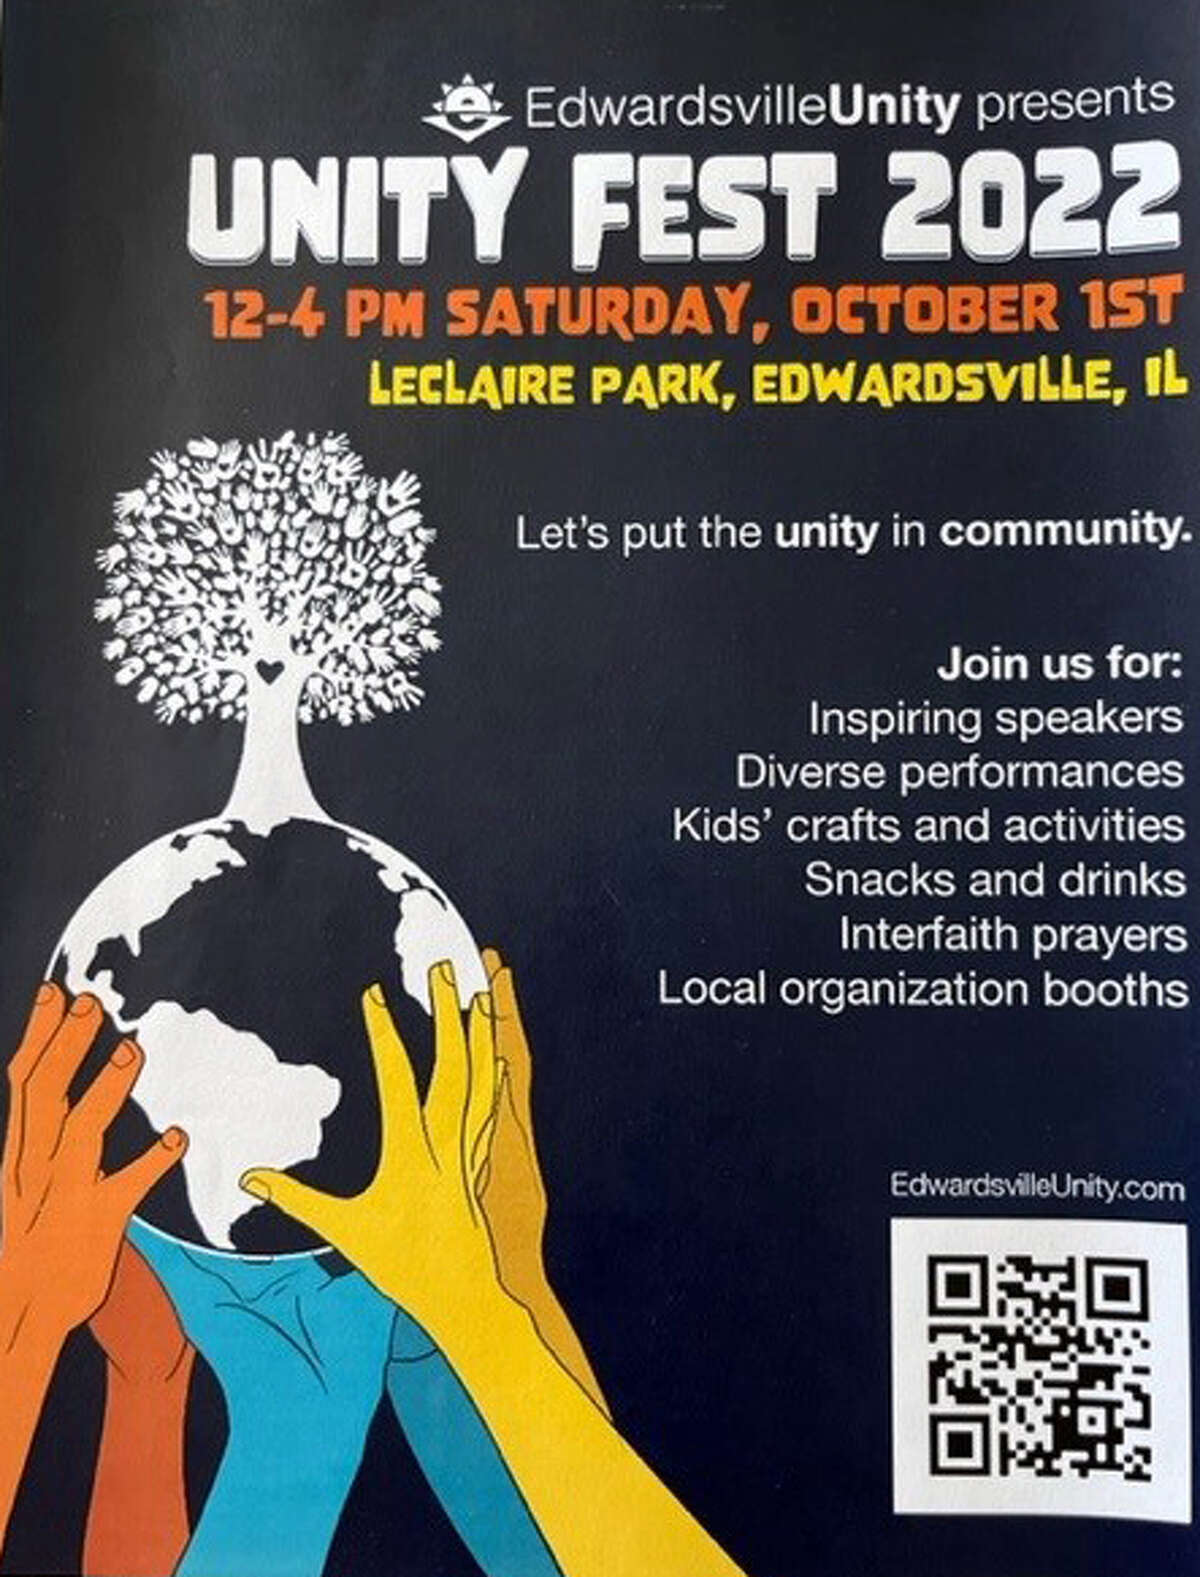 Edwaredsville Unity is hosting the inaugural Unity Fest 2022 at Leclaire Park in Edwardsville.